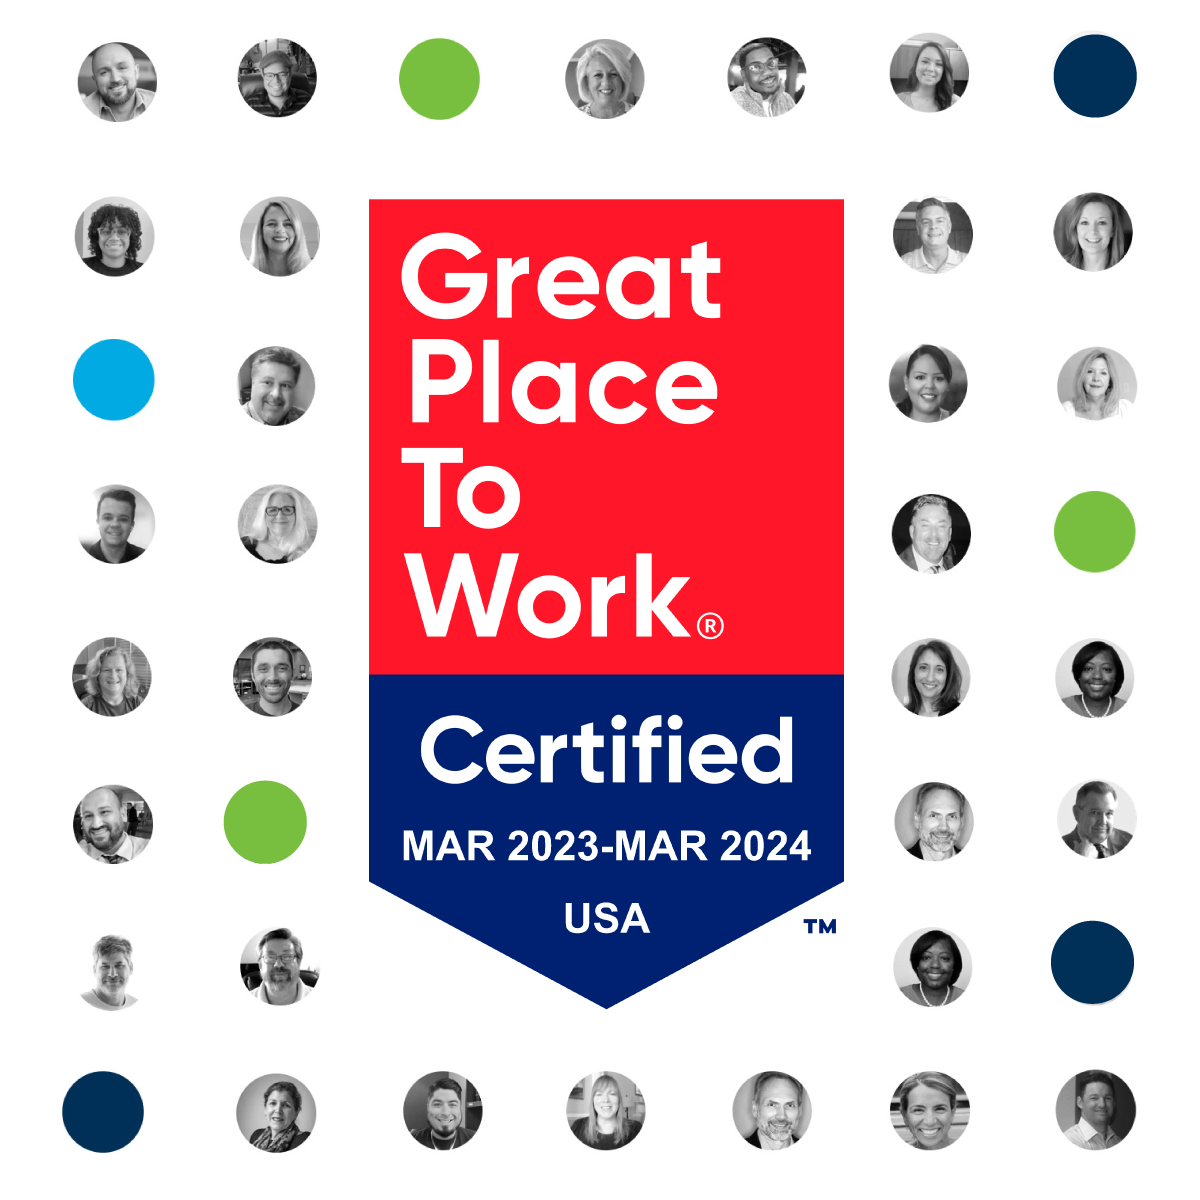 Great places to work